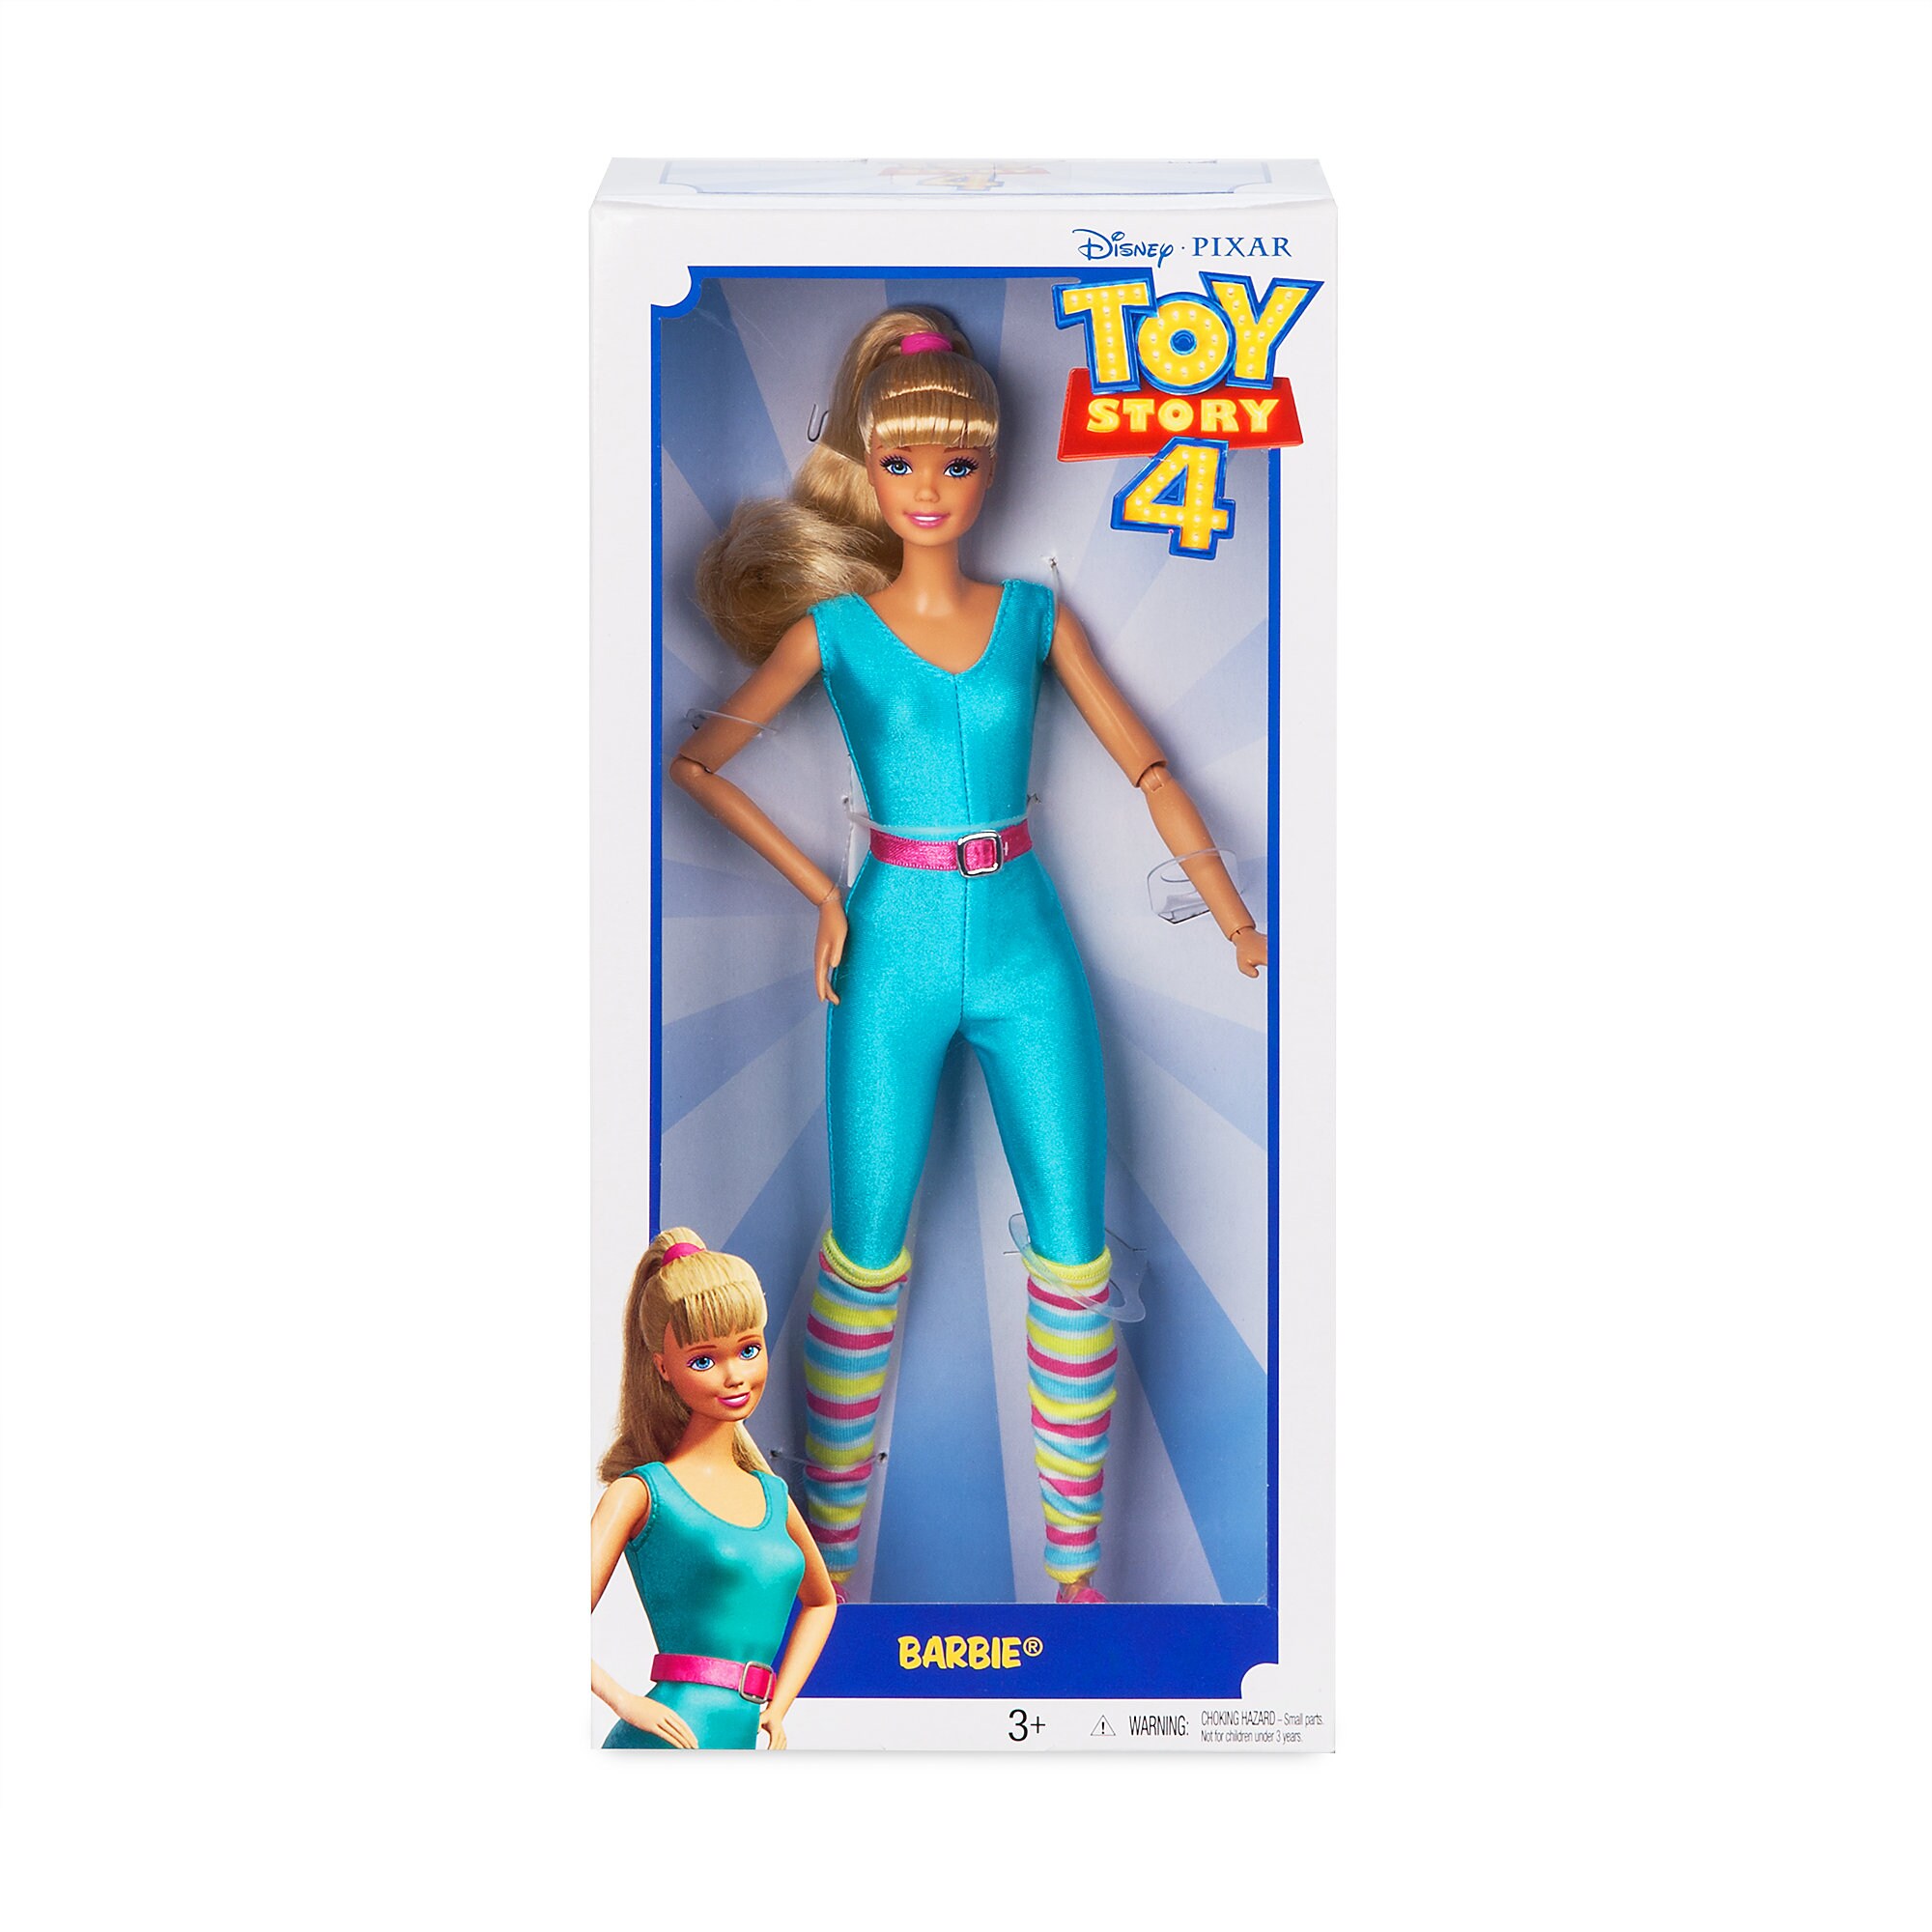 Barbie® Doll by Mattel - Toy Story 4 here now – Dis Merchandise News